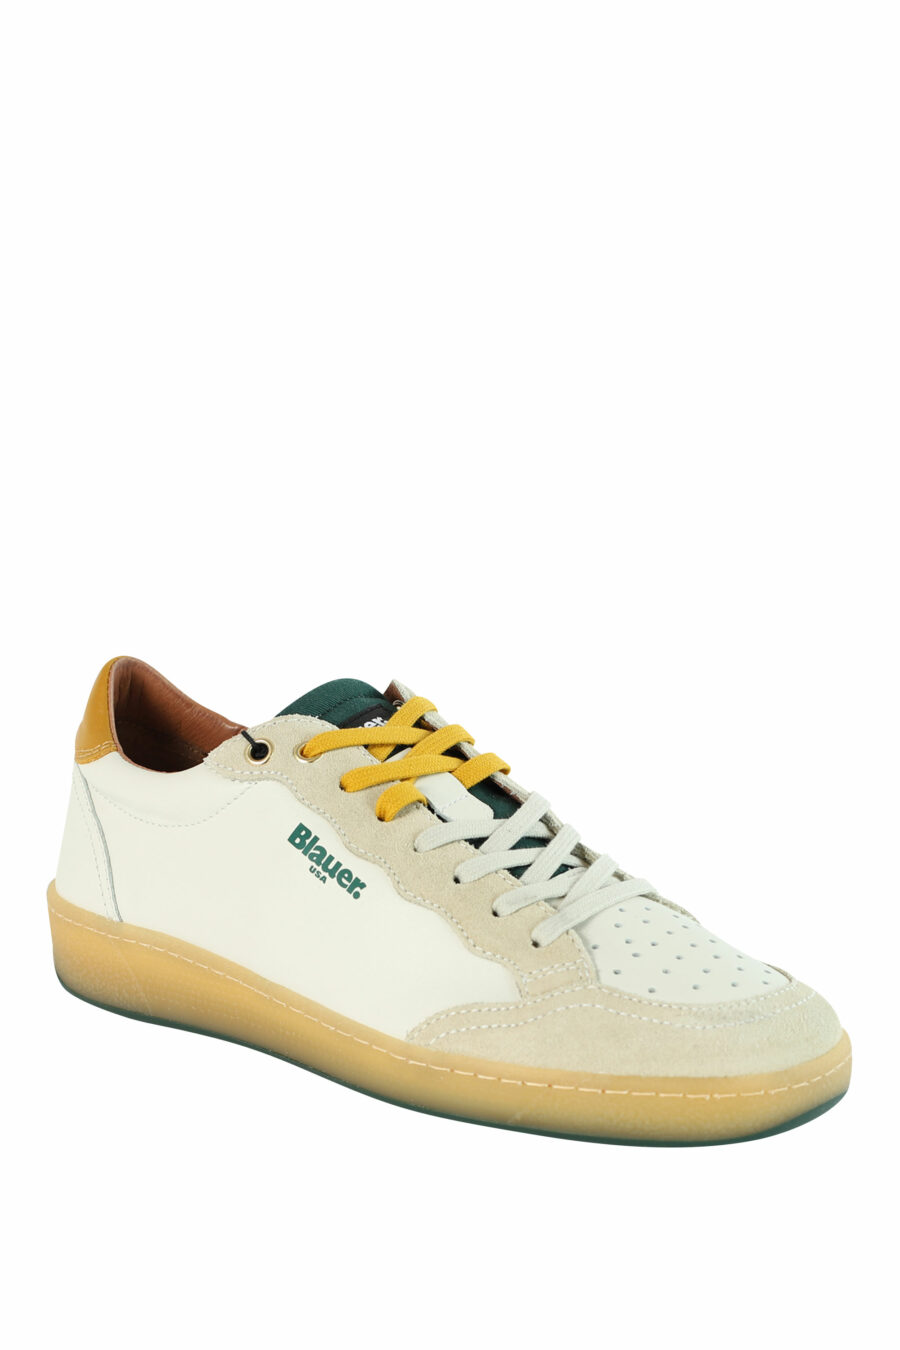 White "MURRAY" trainers with green and yellow details - 8058156497566 2